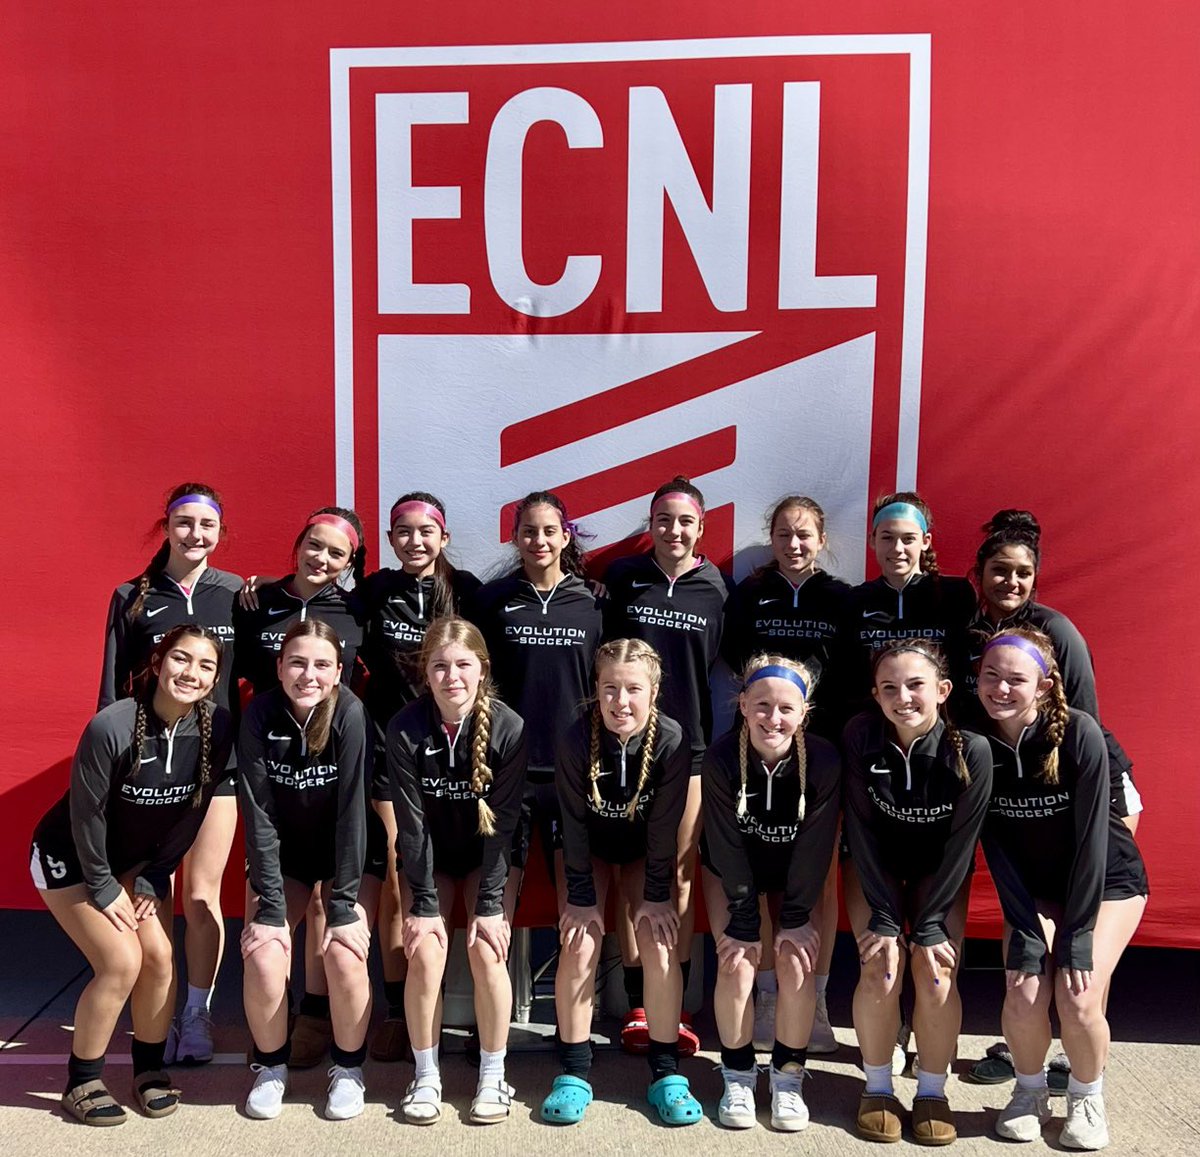 Fell 0-1 to a strong FC Dallas team in the final minute today. Tough loss but proud of my teammates and how we played, going 2-1 for the weekend! Thank you @ECNLgirls for a great event and to all the coaches who came to watch!! ❤️⚽️🖤 @Evolution_SC14 @ImYouthSoccer @NcsaSoccer